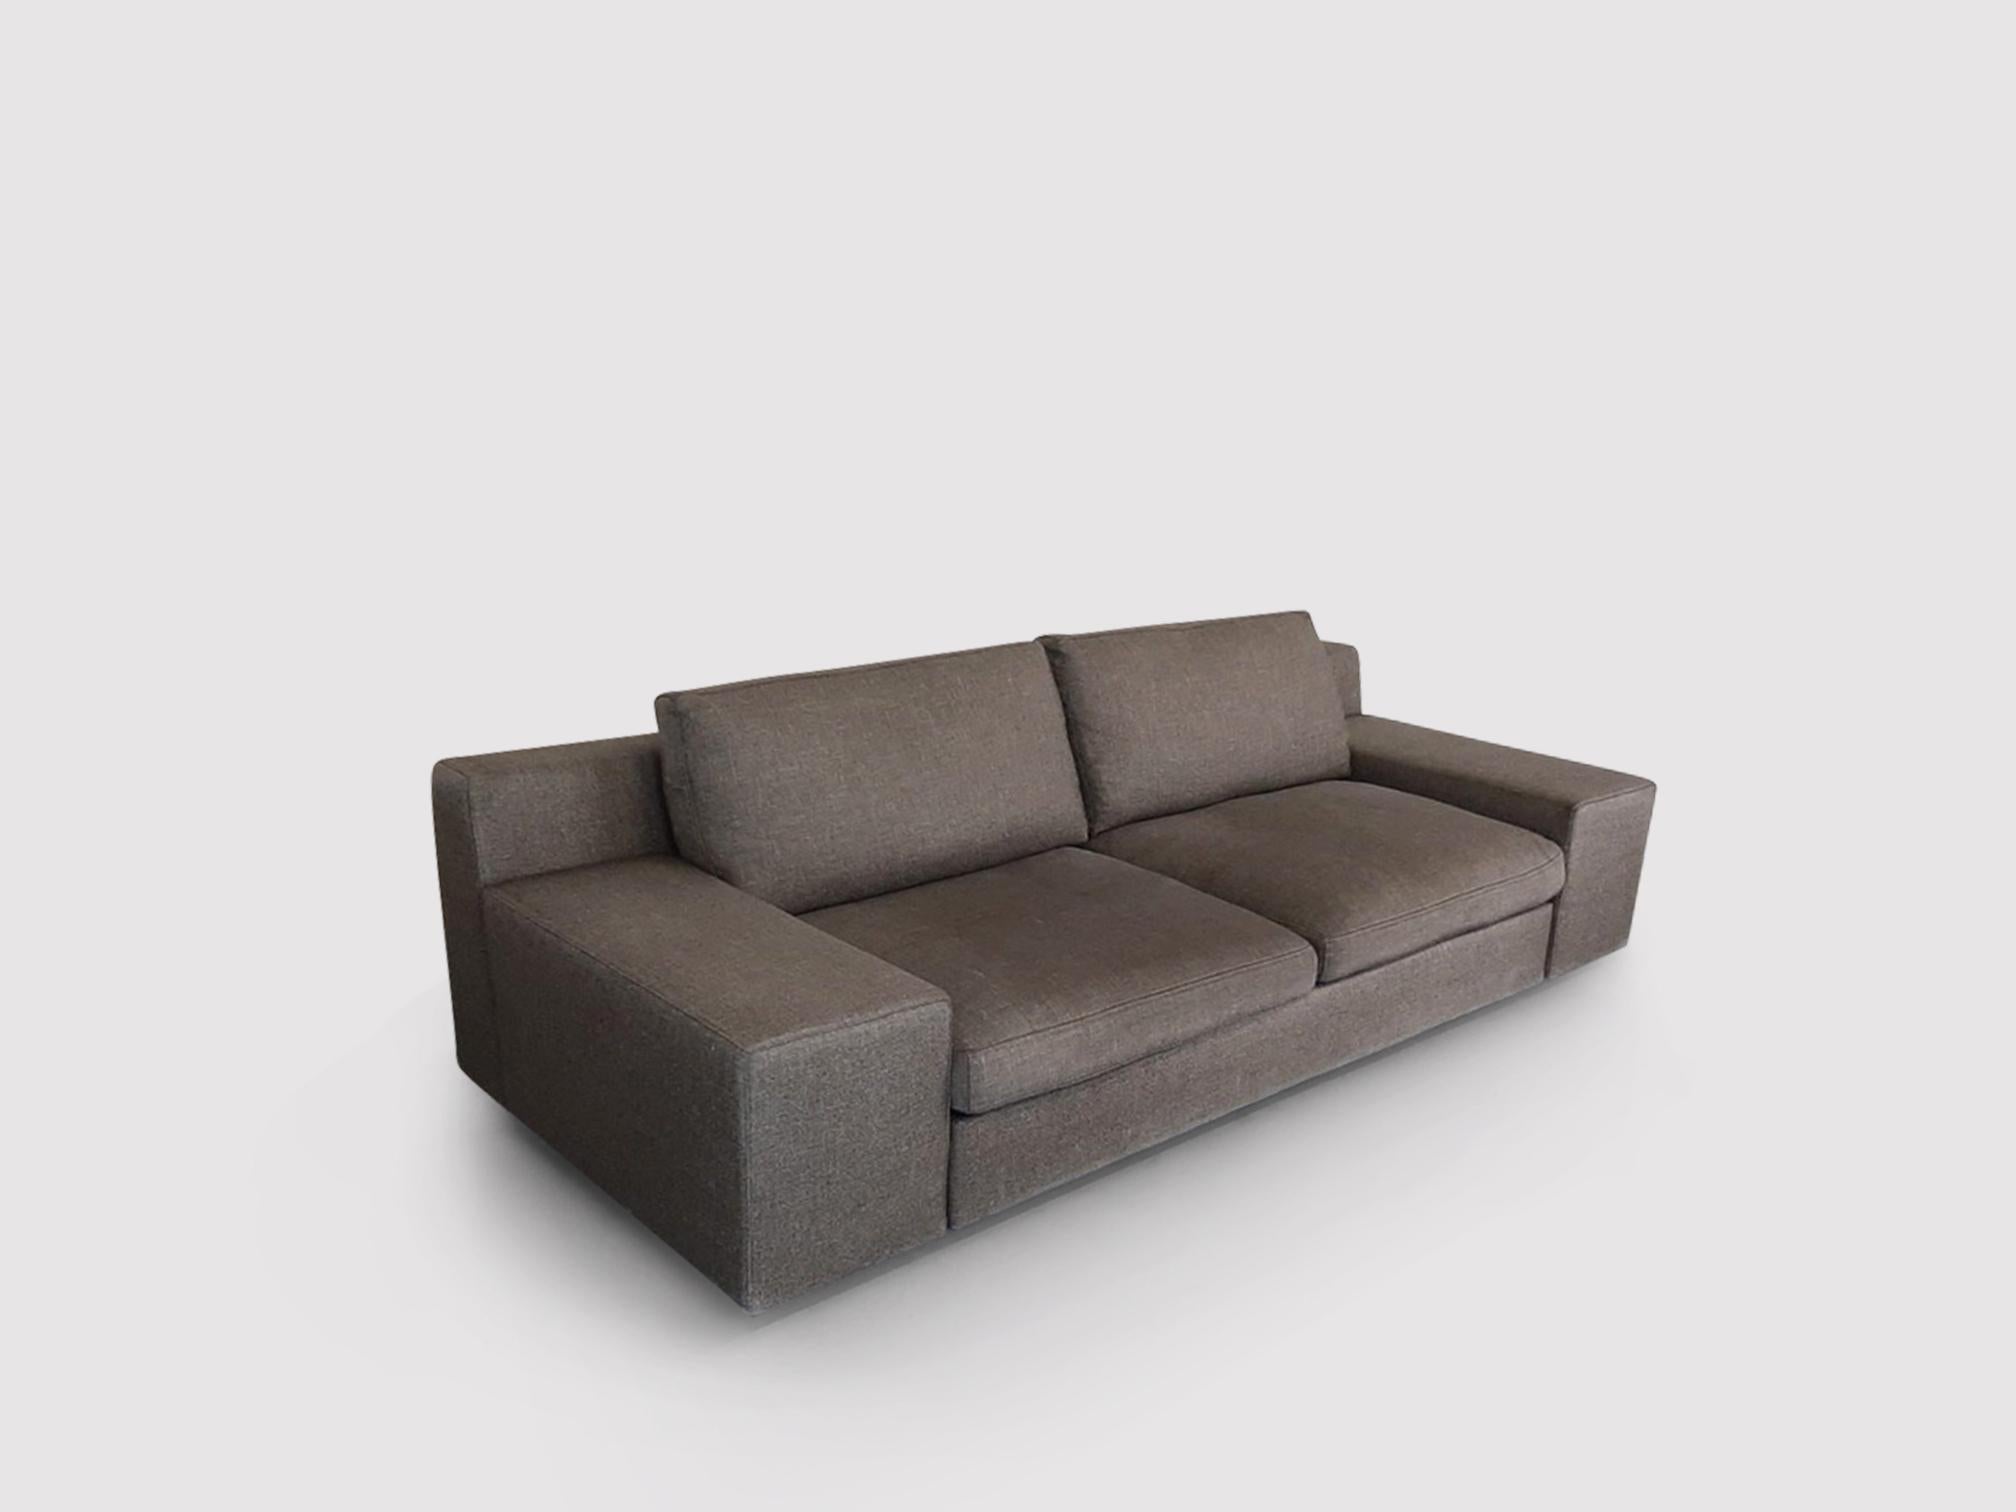 Italian Contemporary 235-236 Mister 2, 5 Seater Sofa by Philippe Starck for Cassina 2004